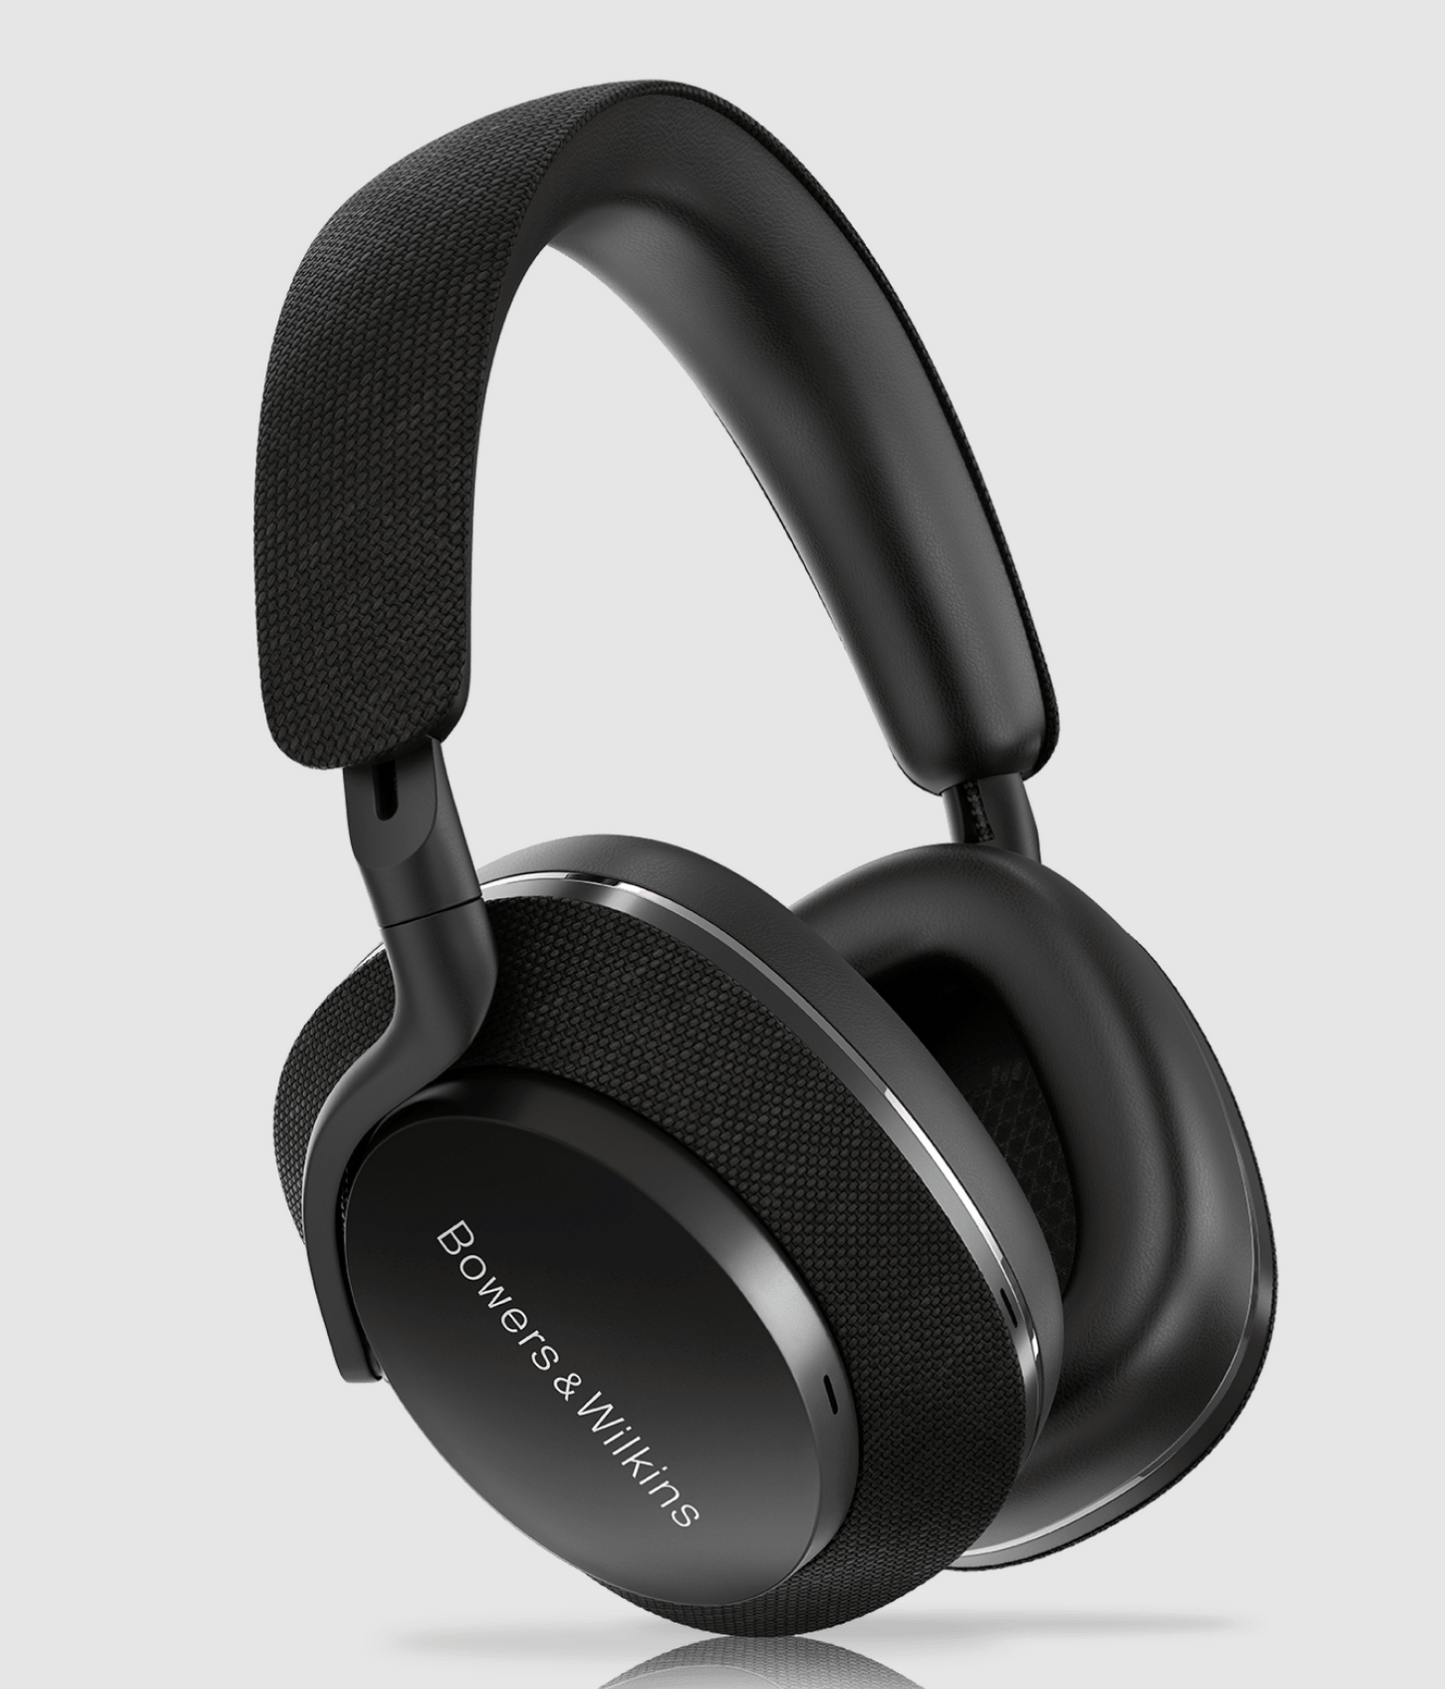 B&W Px7 S2 Noise Cancelling Headphones in Gray.  Image shows controls